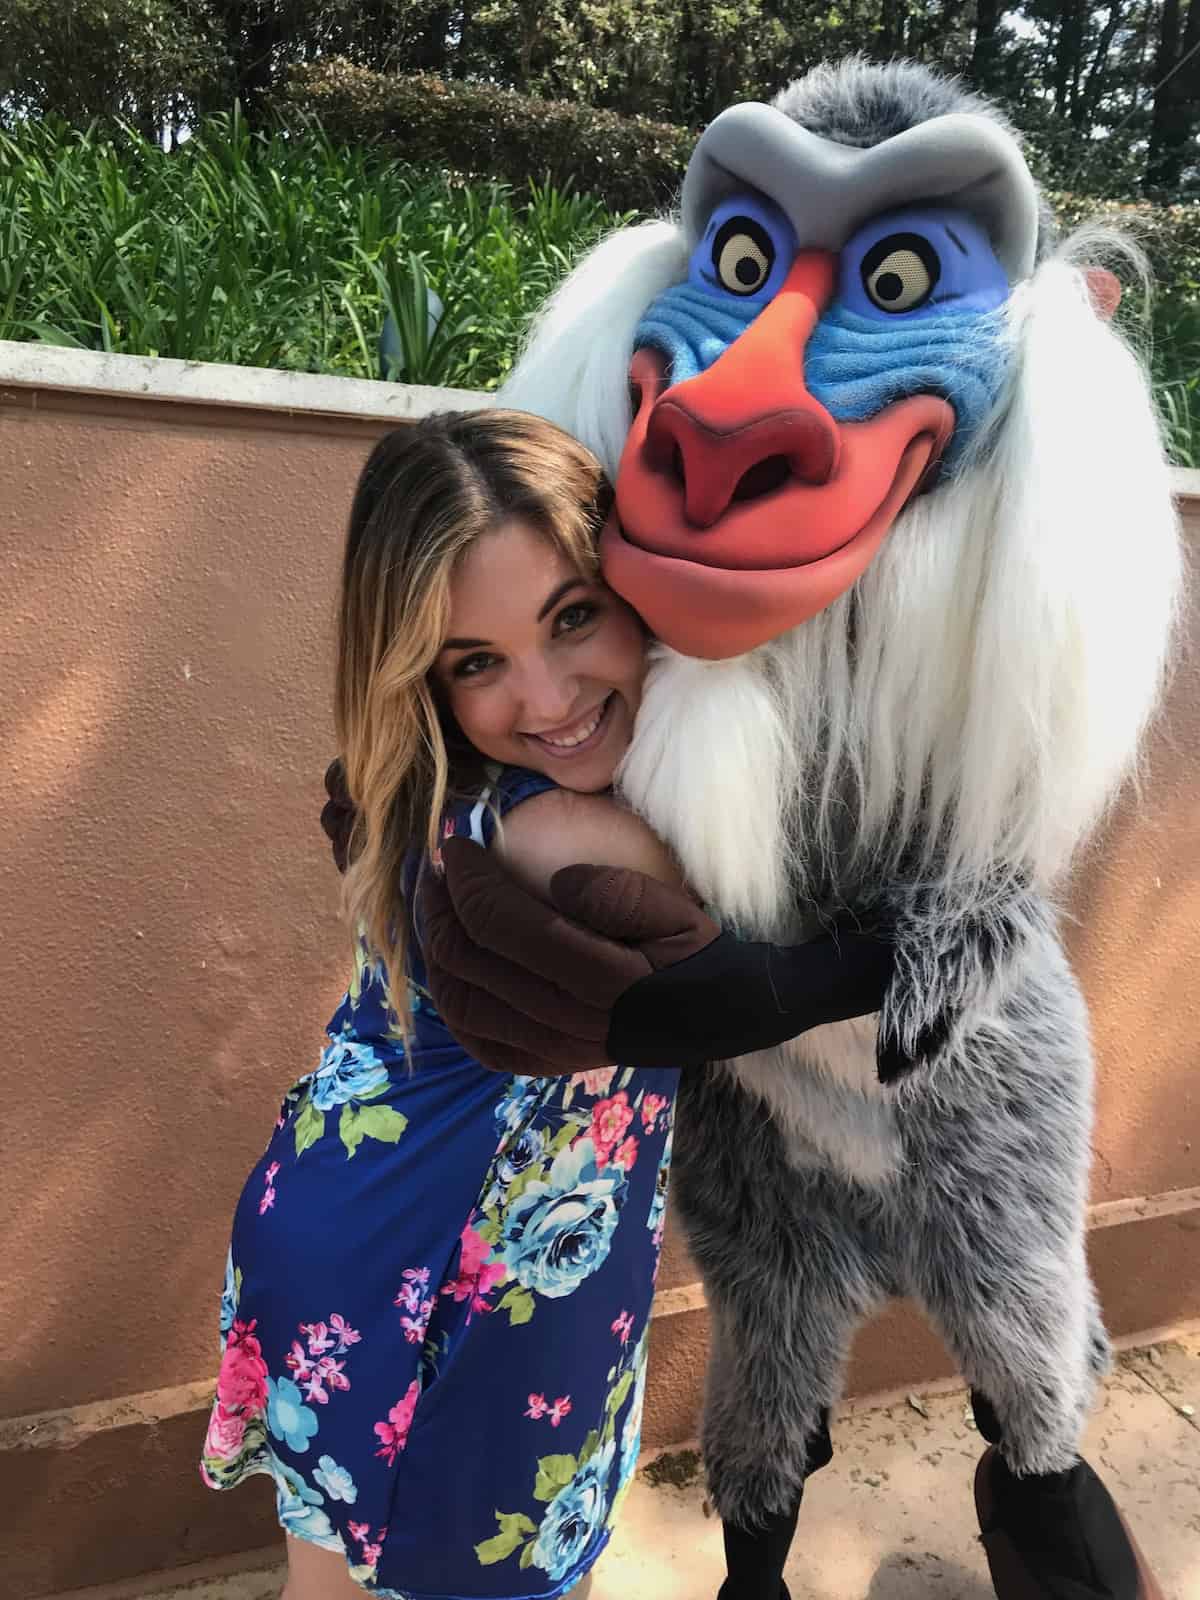 How can I meet Rare characters at Disney World?